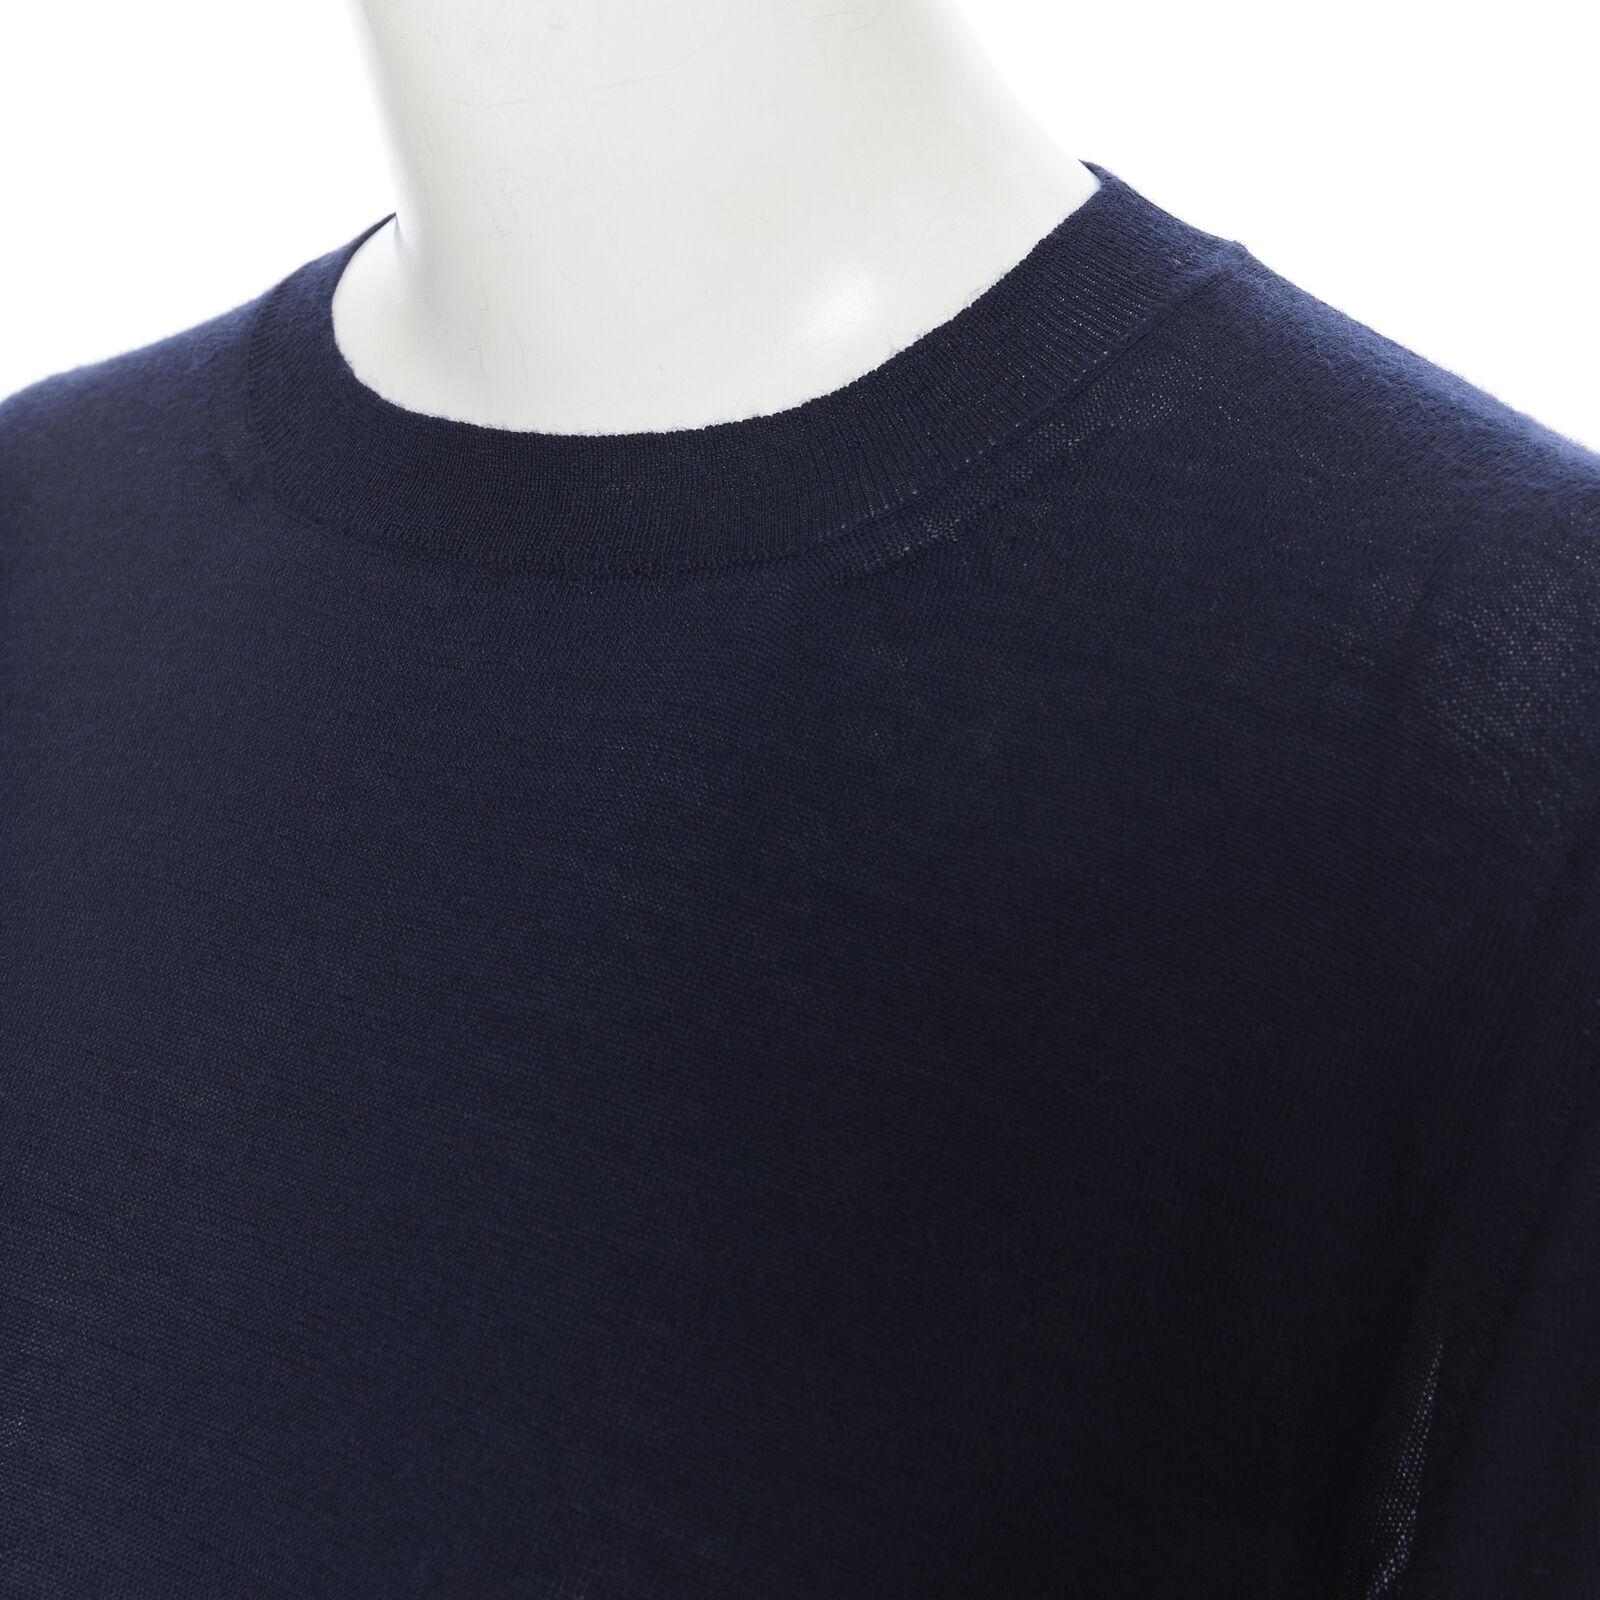 MARNI navy blue cashmere dual front slit pocket long sleeve sweater IT40 S 3